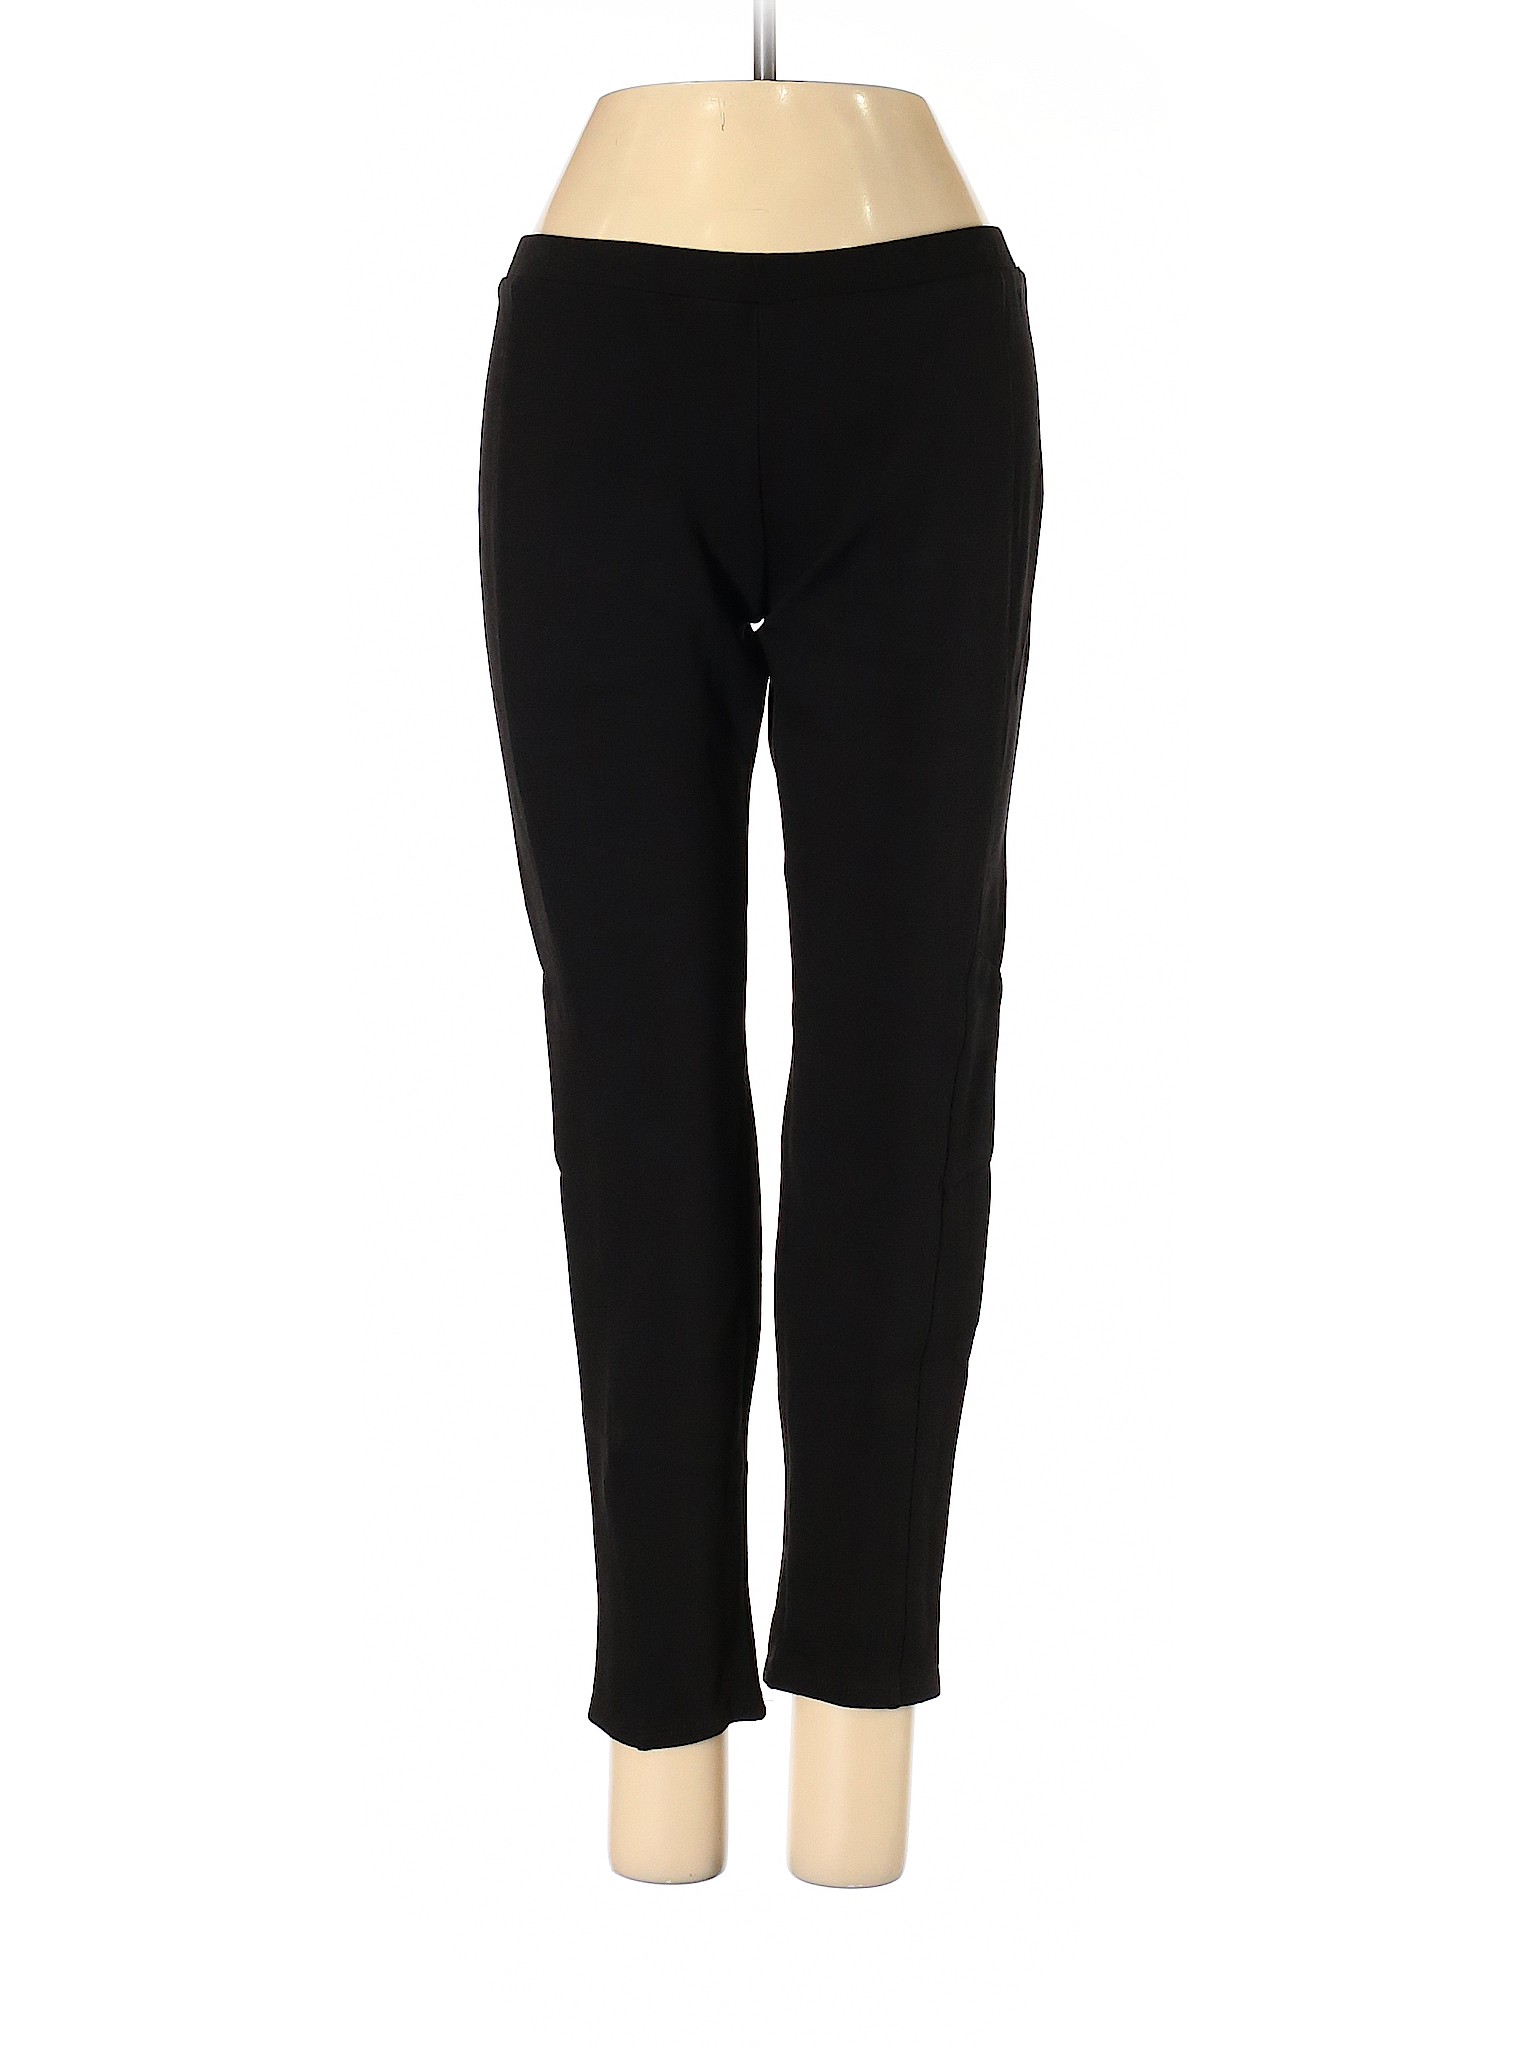 Joie Solid Black Casual Pants Size S - 55% off | thredUP